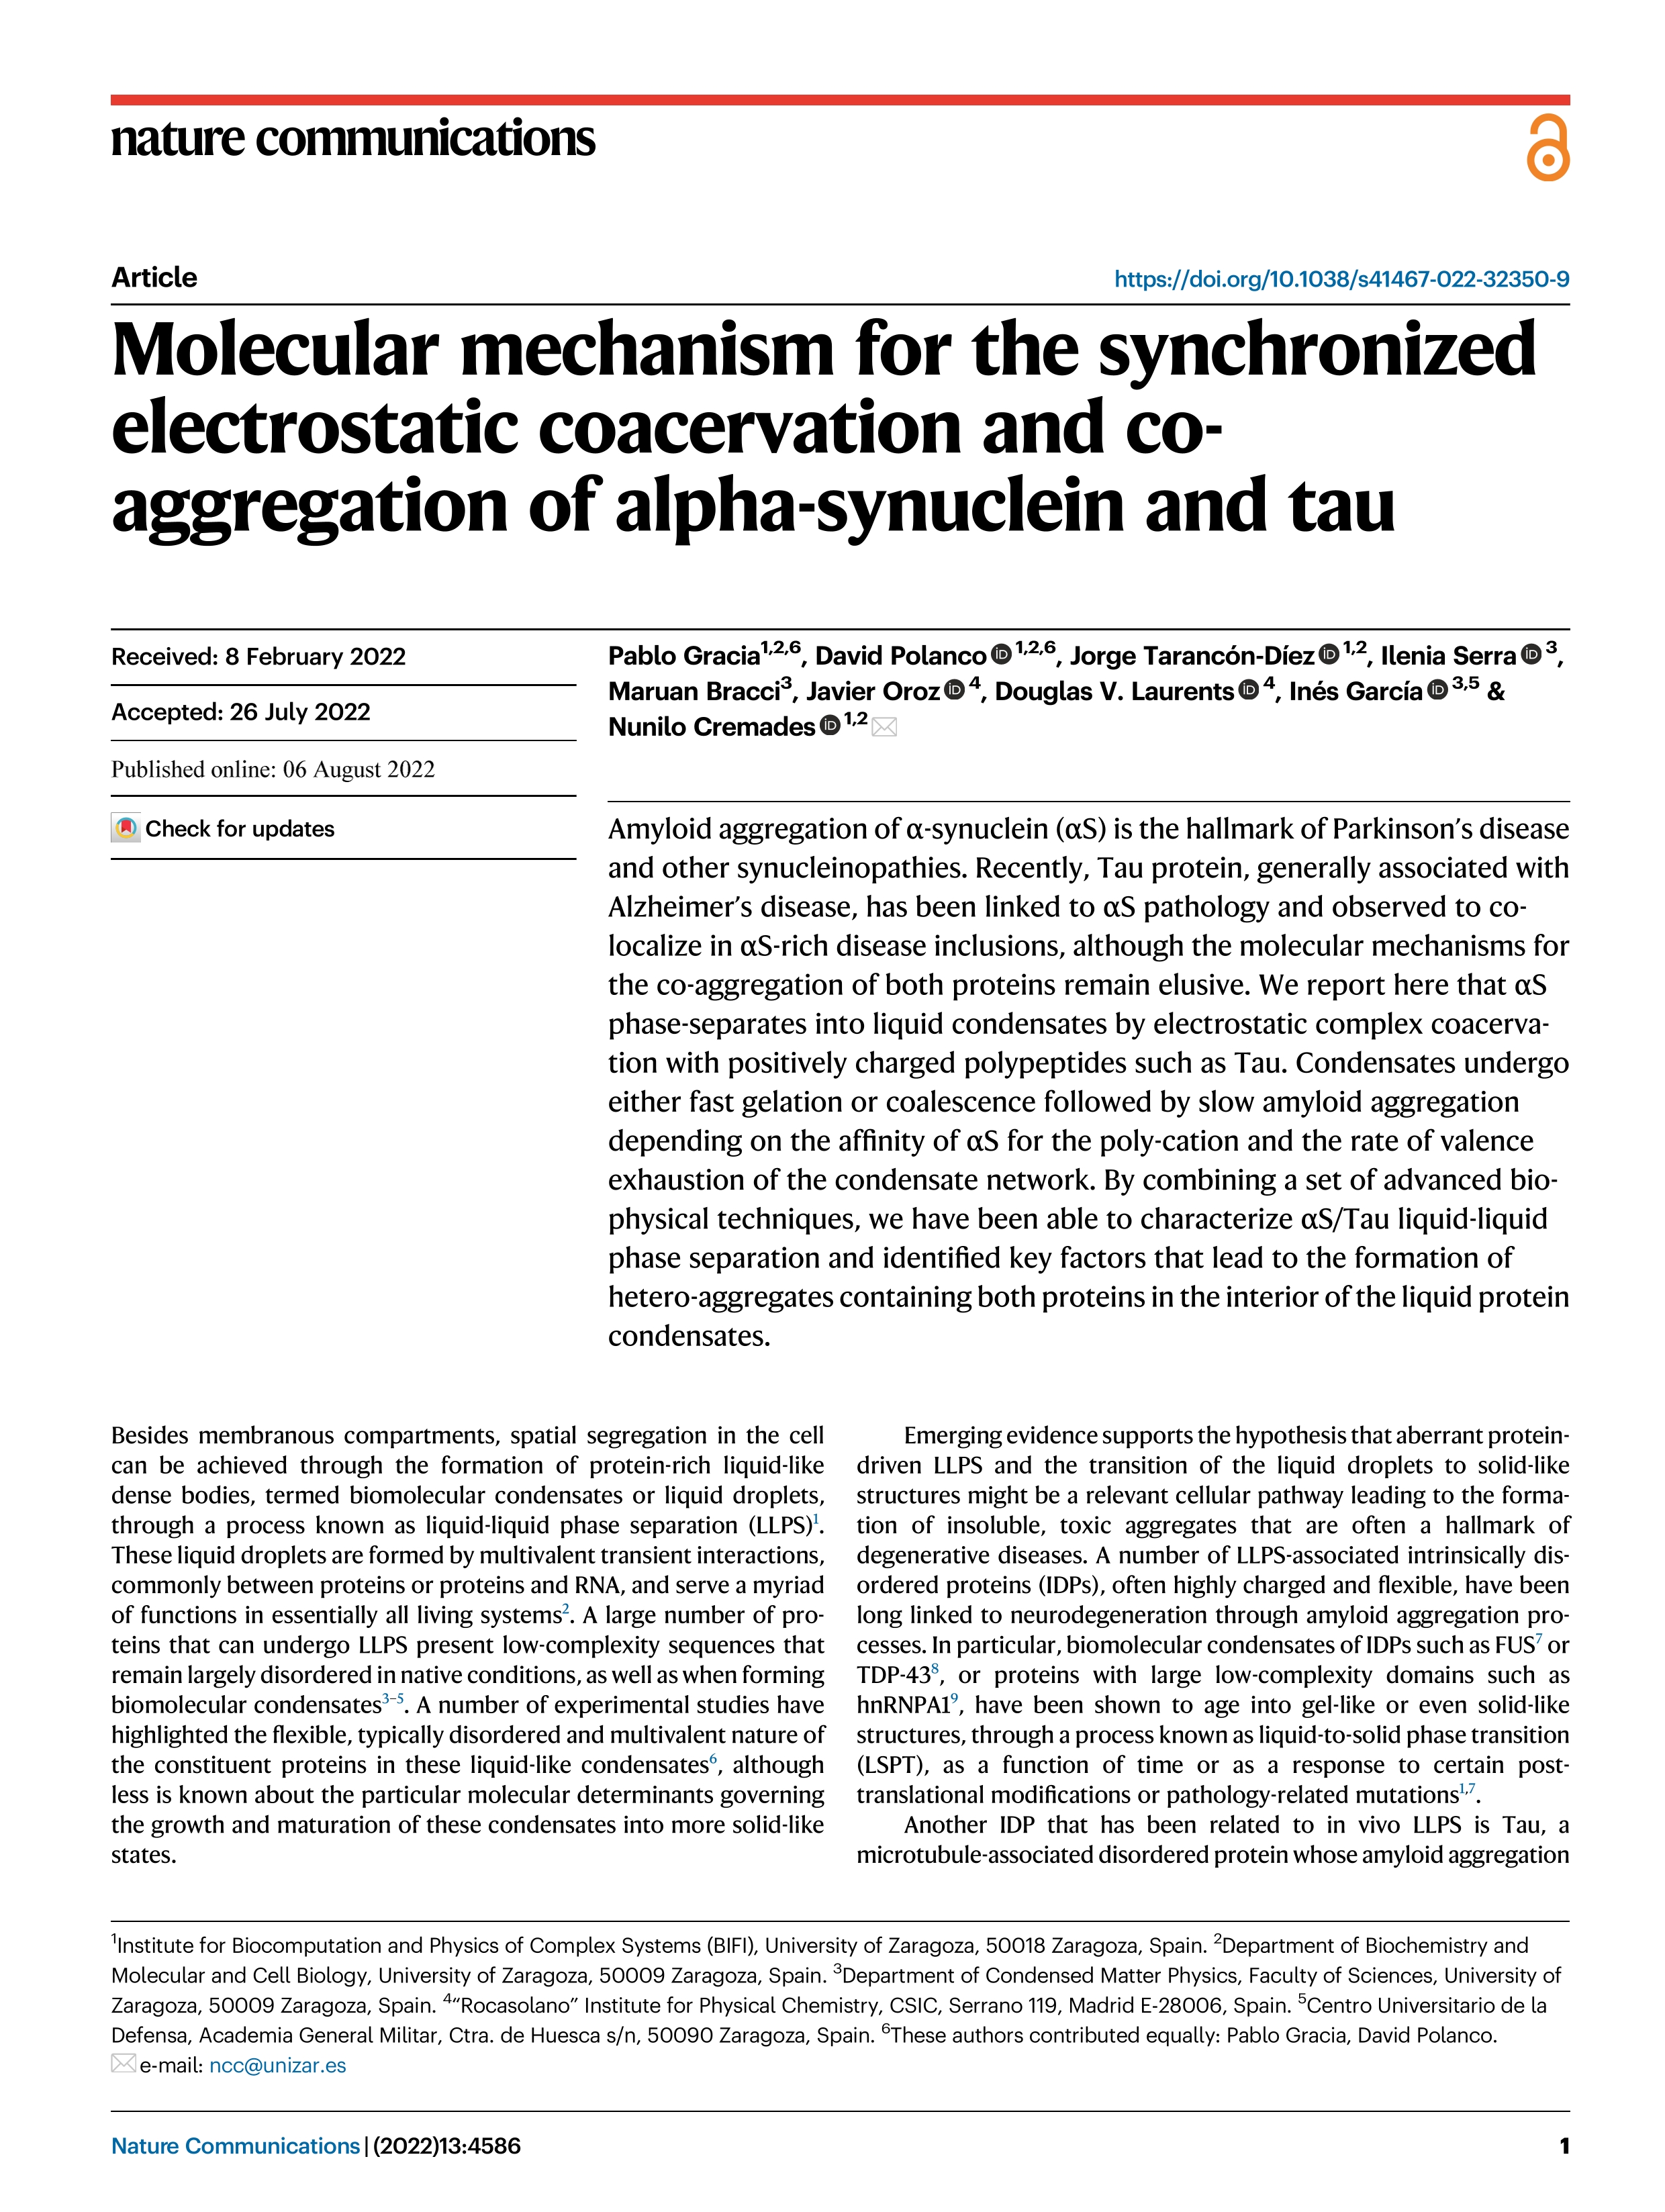 Molecular mechanism for the synchronized electrostatic coacervation and co-aggregation of a-synuclein and tau